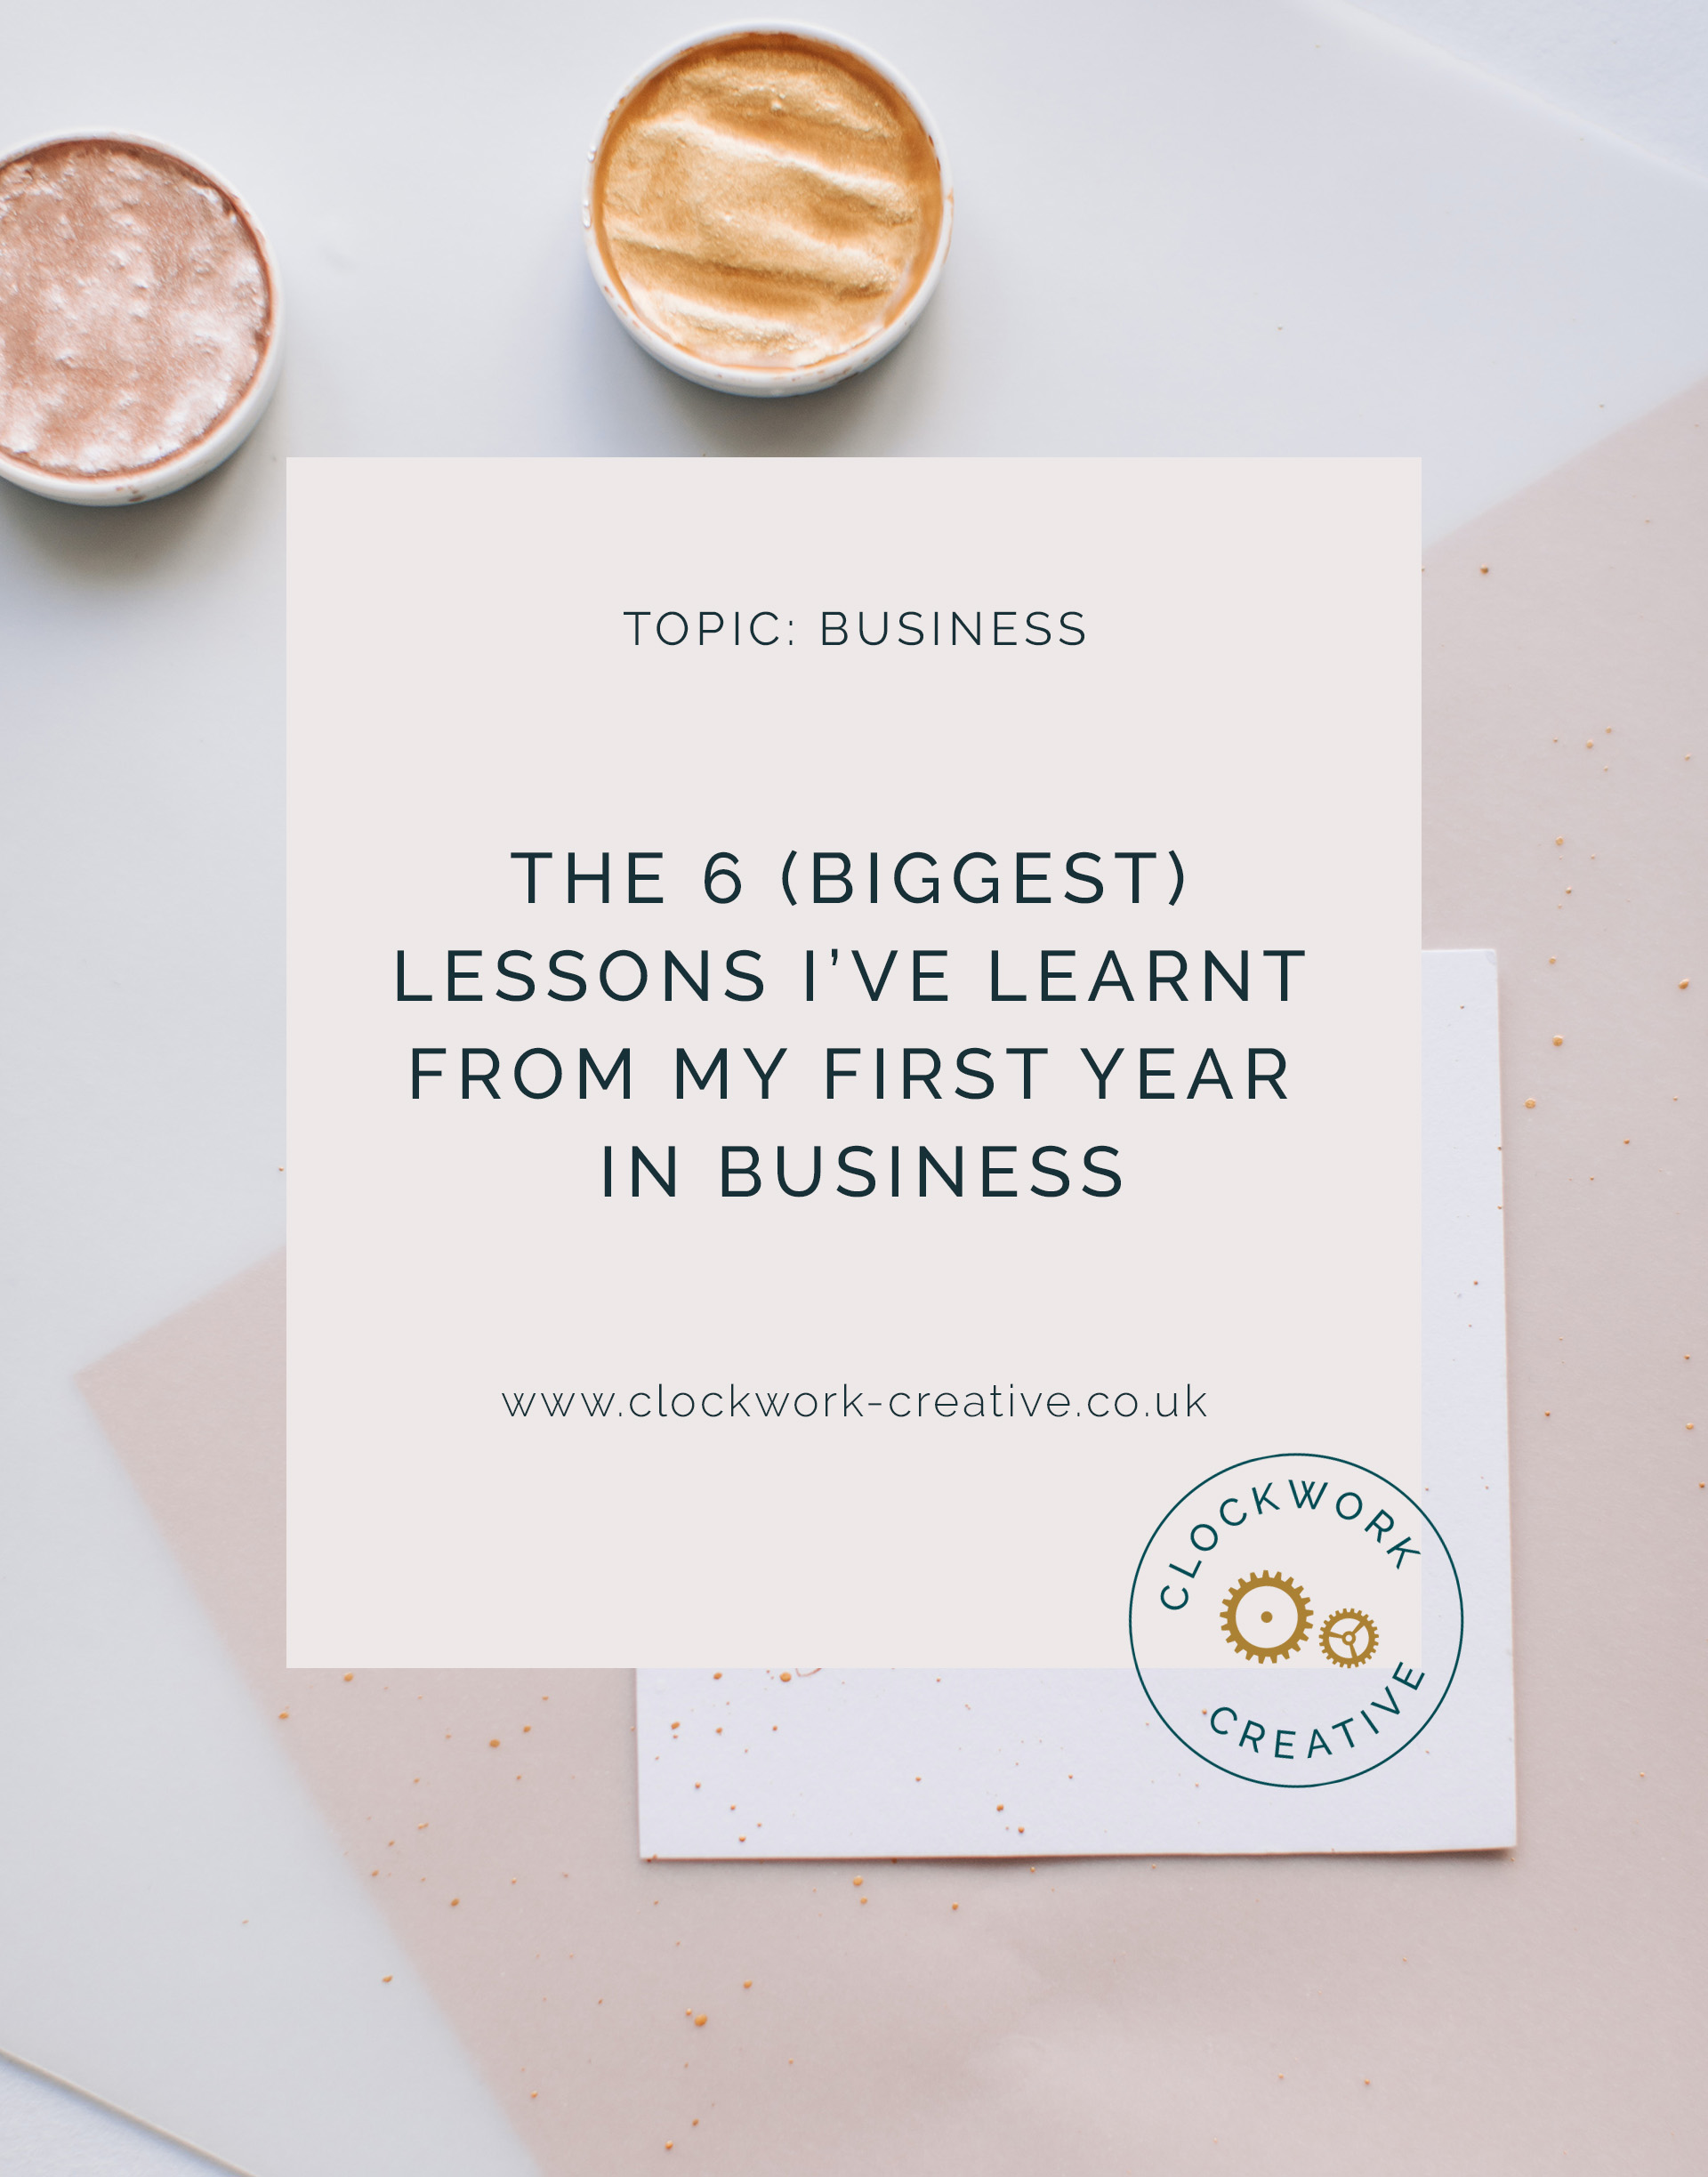 The 6 (biggest) lessons learnt from first year in business